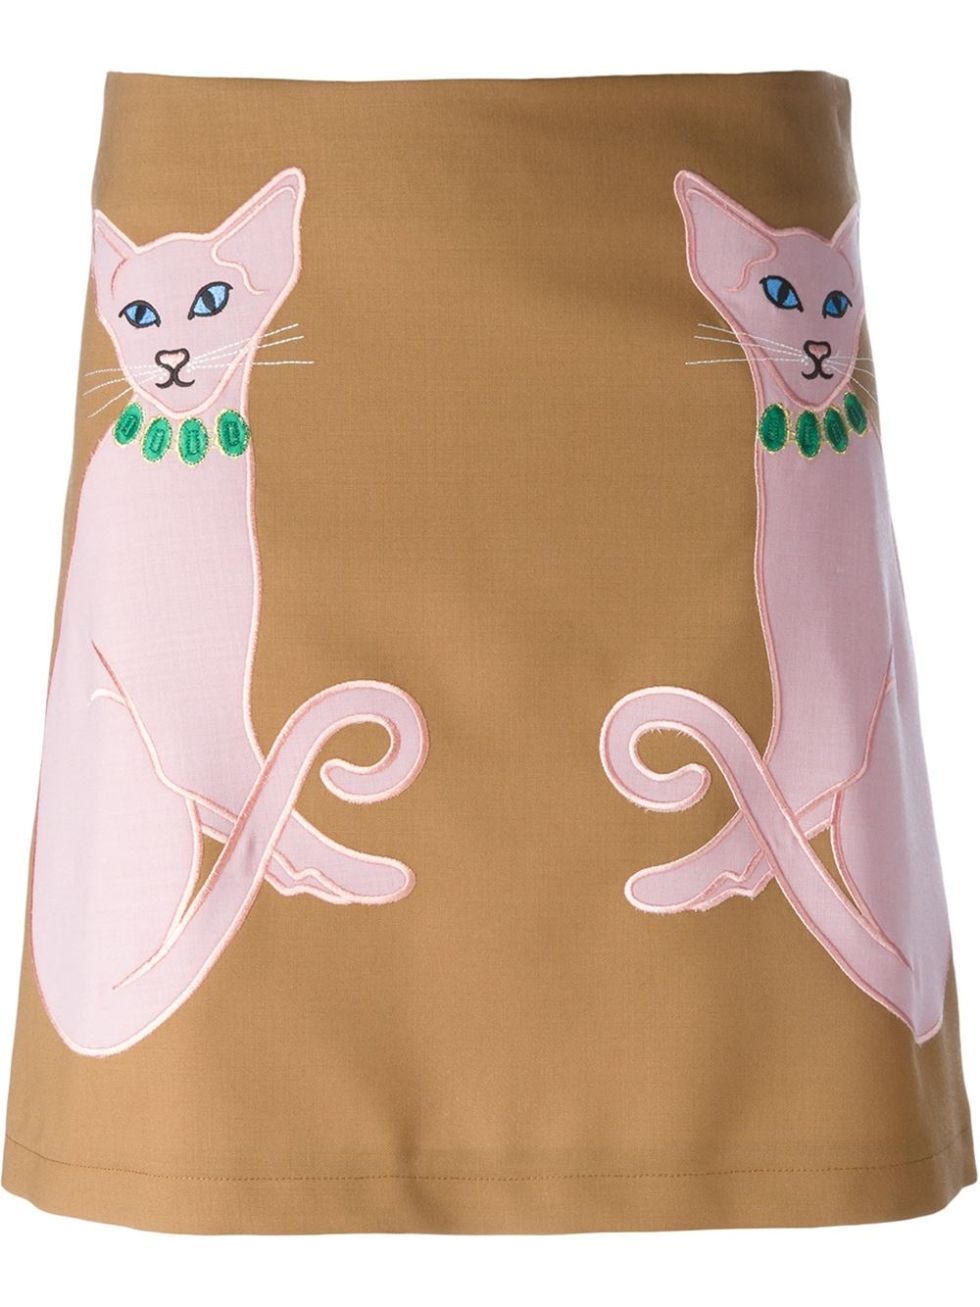 Brown, Small to medium-sized cats, Felidae, Cat, Peach, Illustration, Whiskers, Tail, Shoulder bag, Paper bag, 